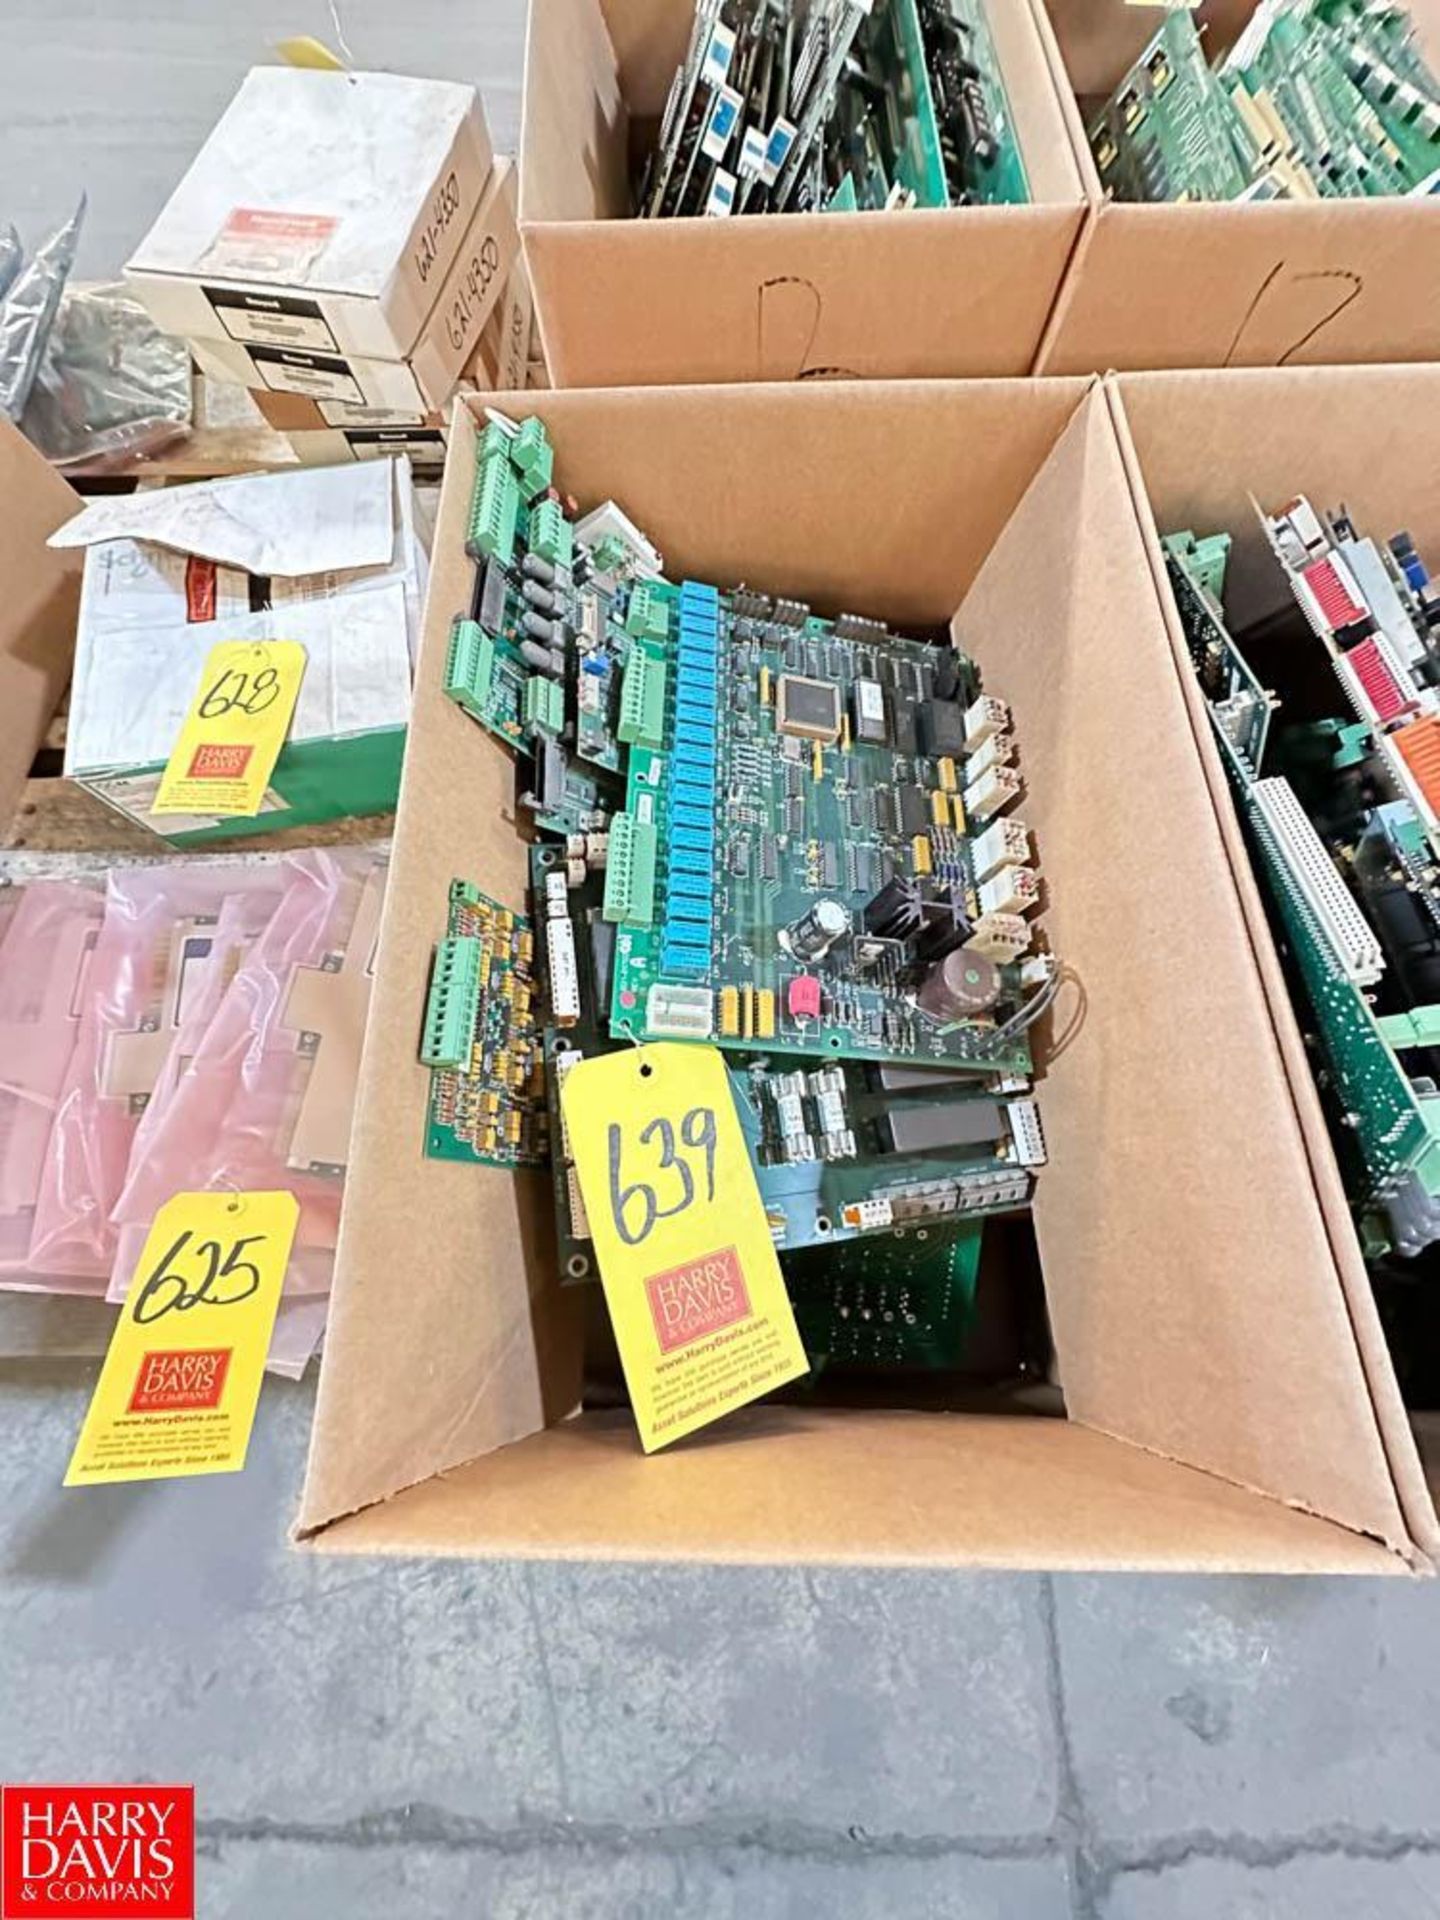 (20) Assorted Circuit Boards with Components